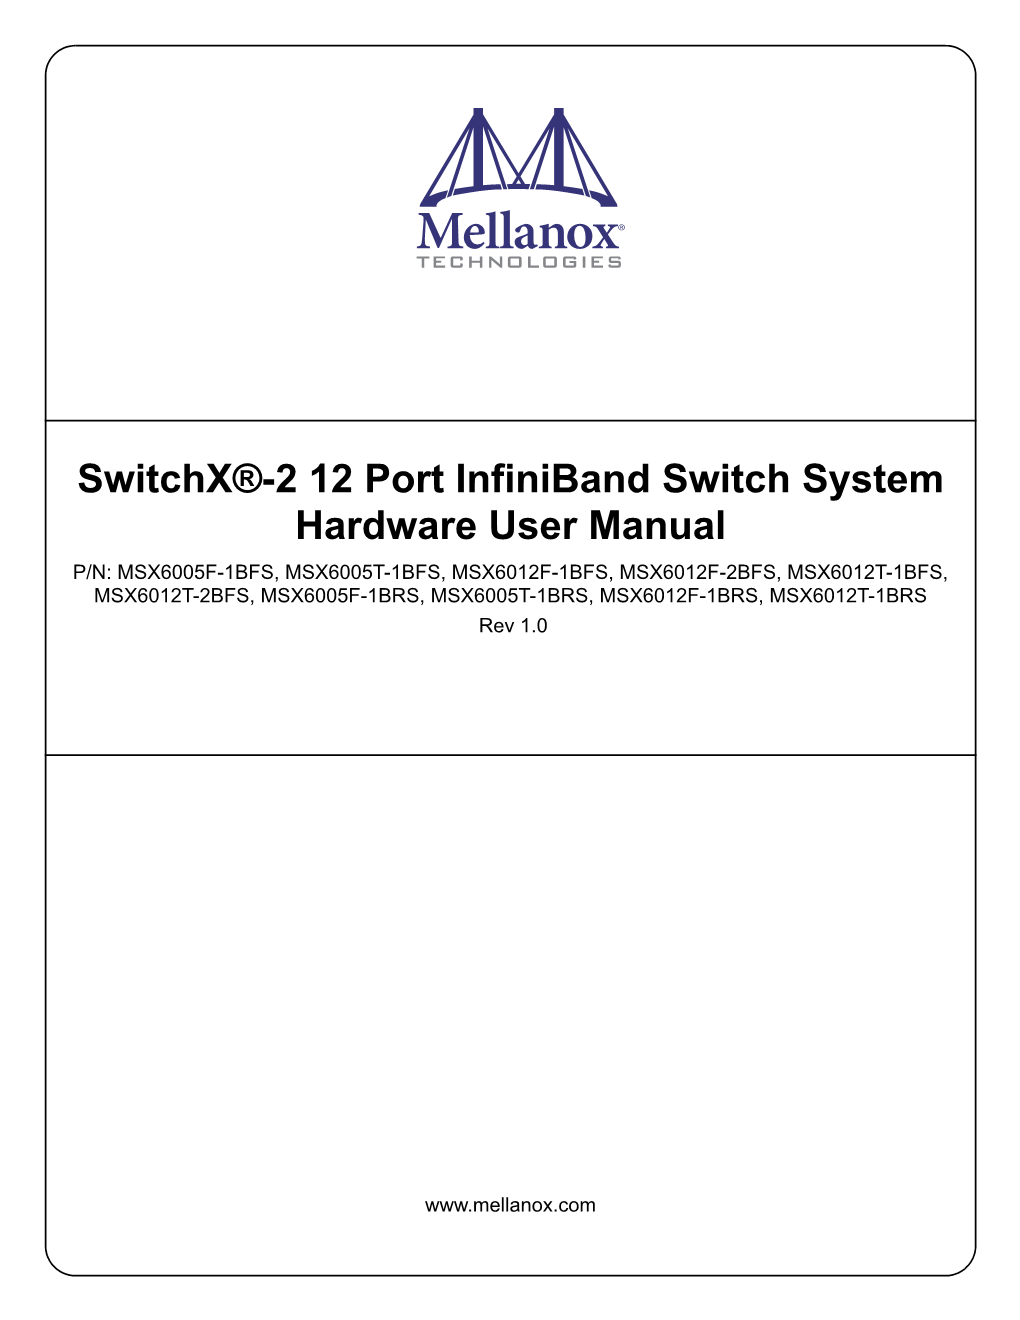 Switchx®-2 12 Port Infiniband Switch System Hardware User Manual